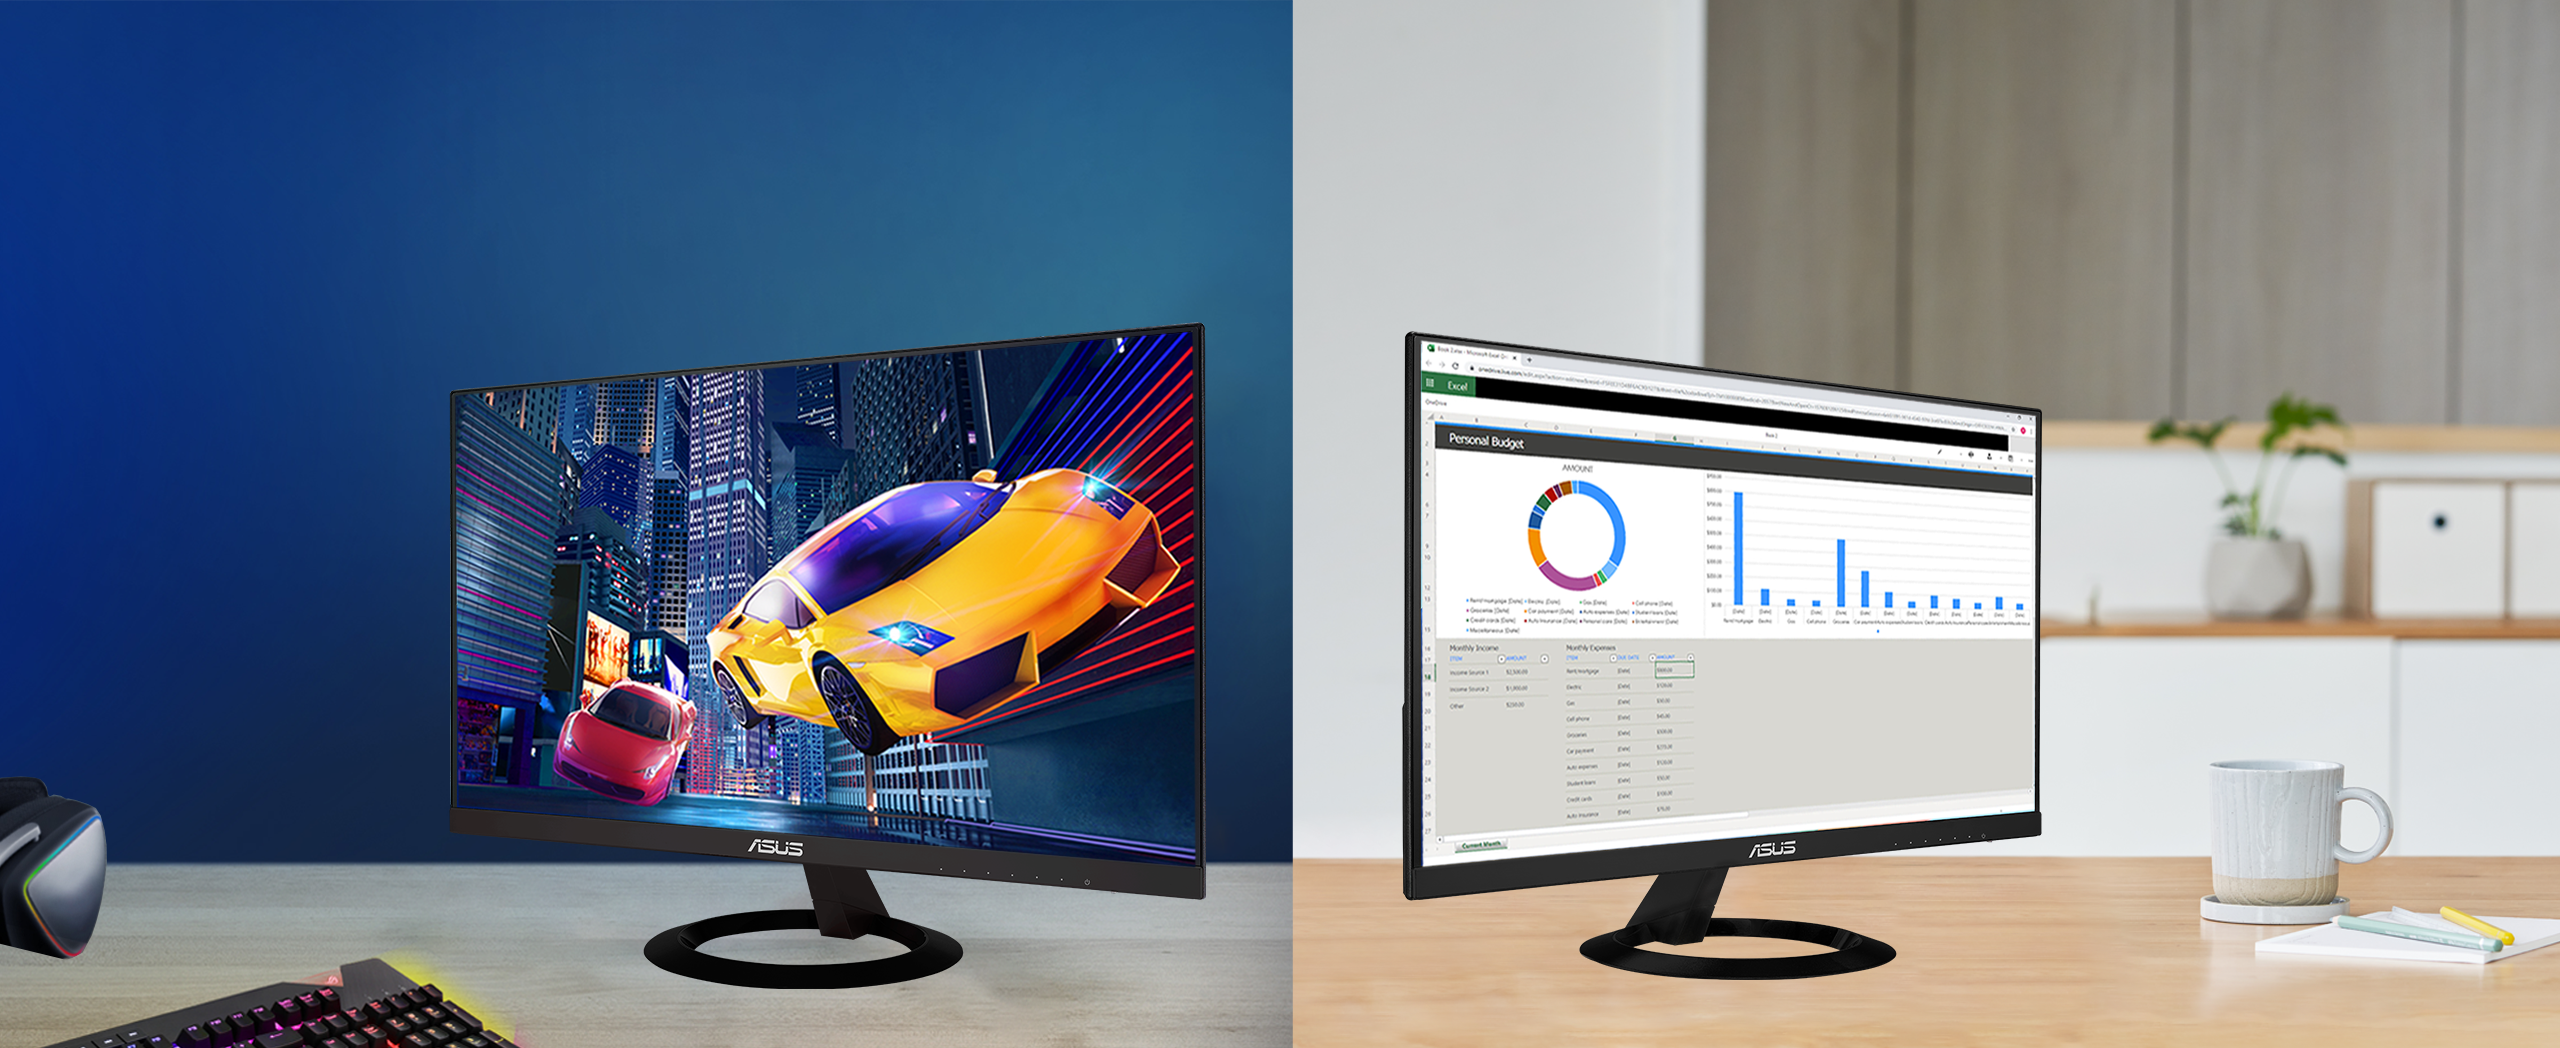 ASUS VZ24EHF is 23.8-inch IPS Eye Care Gaming monitor with fast 100Hz refresh rate and Adaptive-Sync technology to eliminate screen tearing and choppy frame rates for the smoother-than-ever experience.